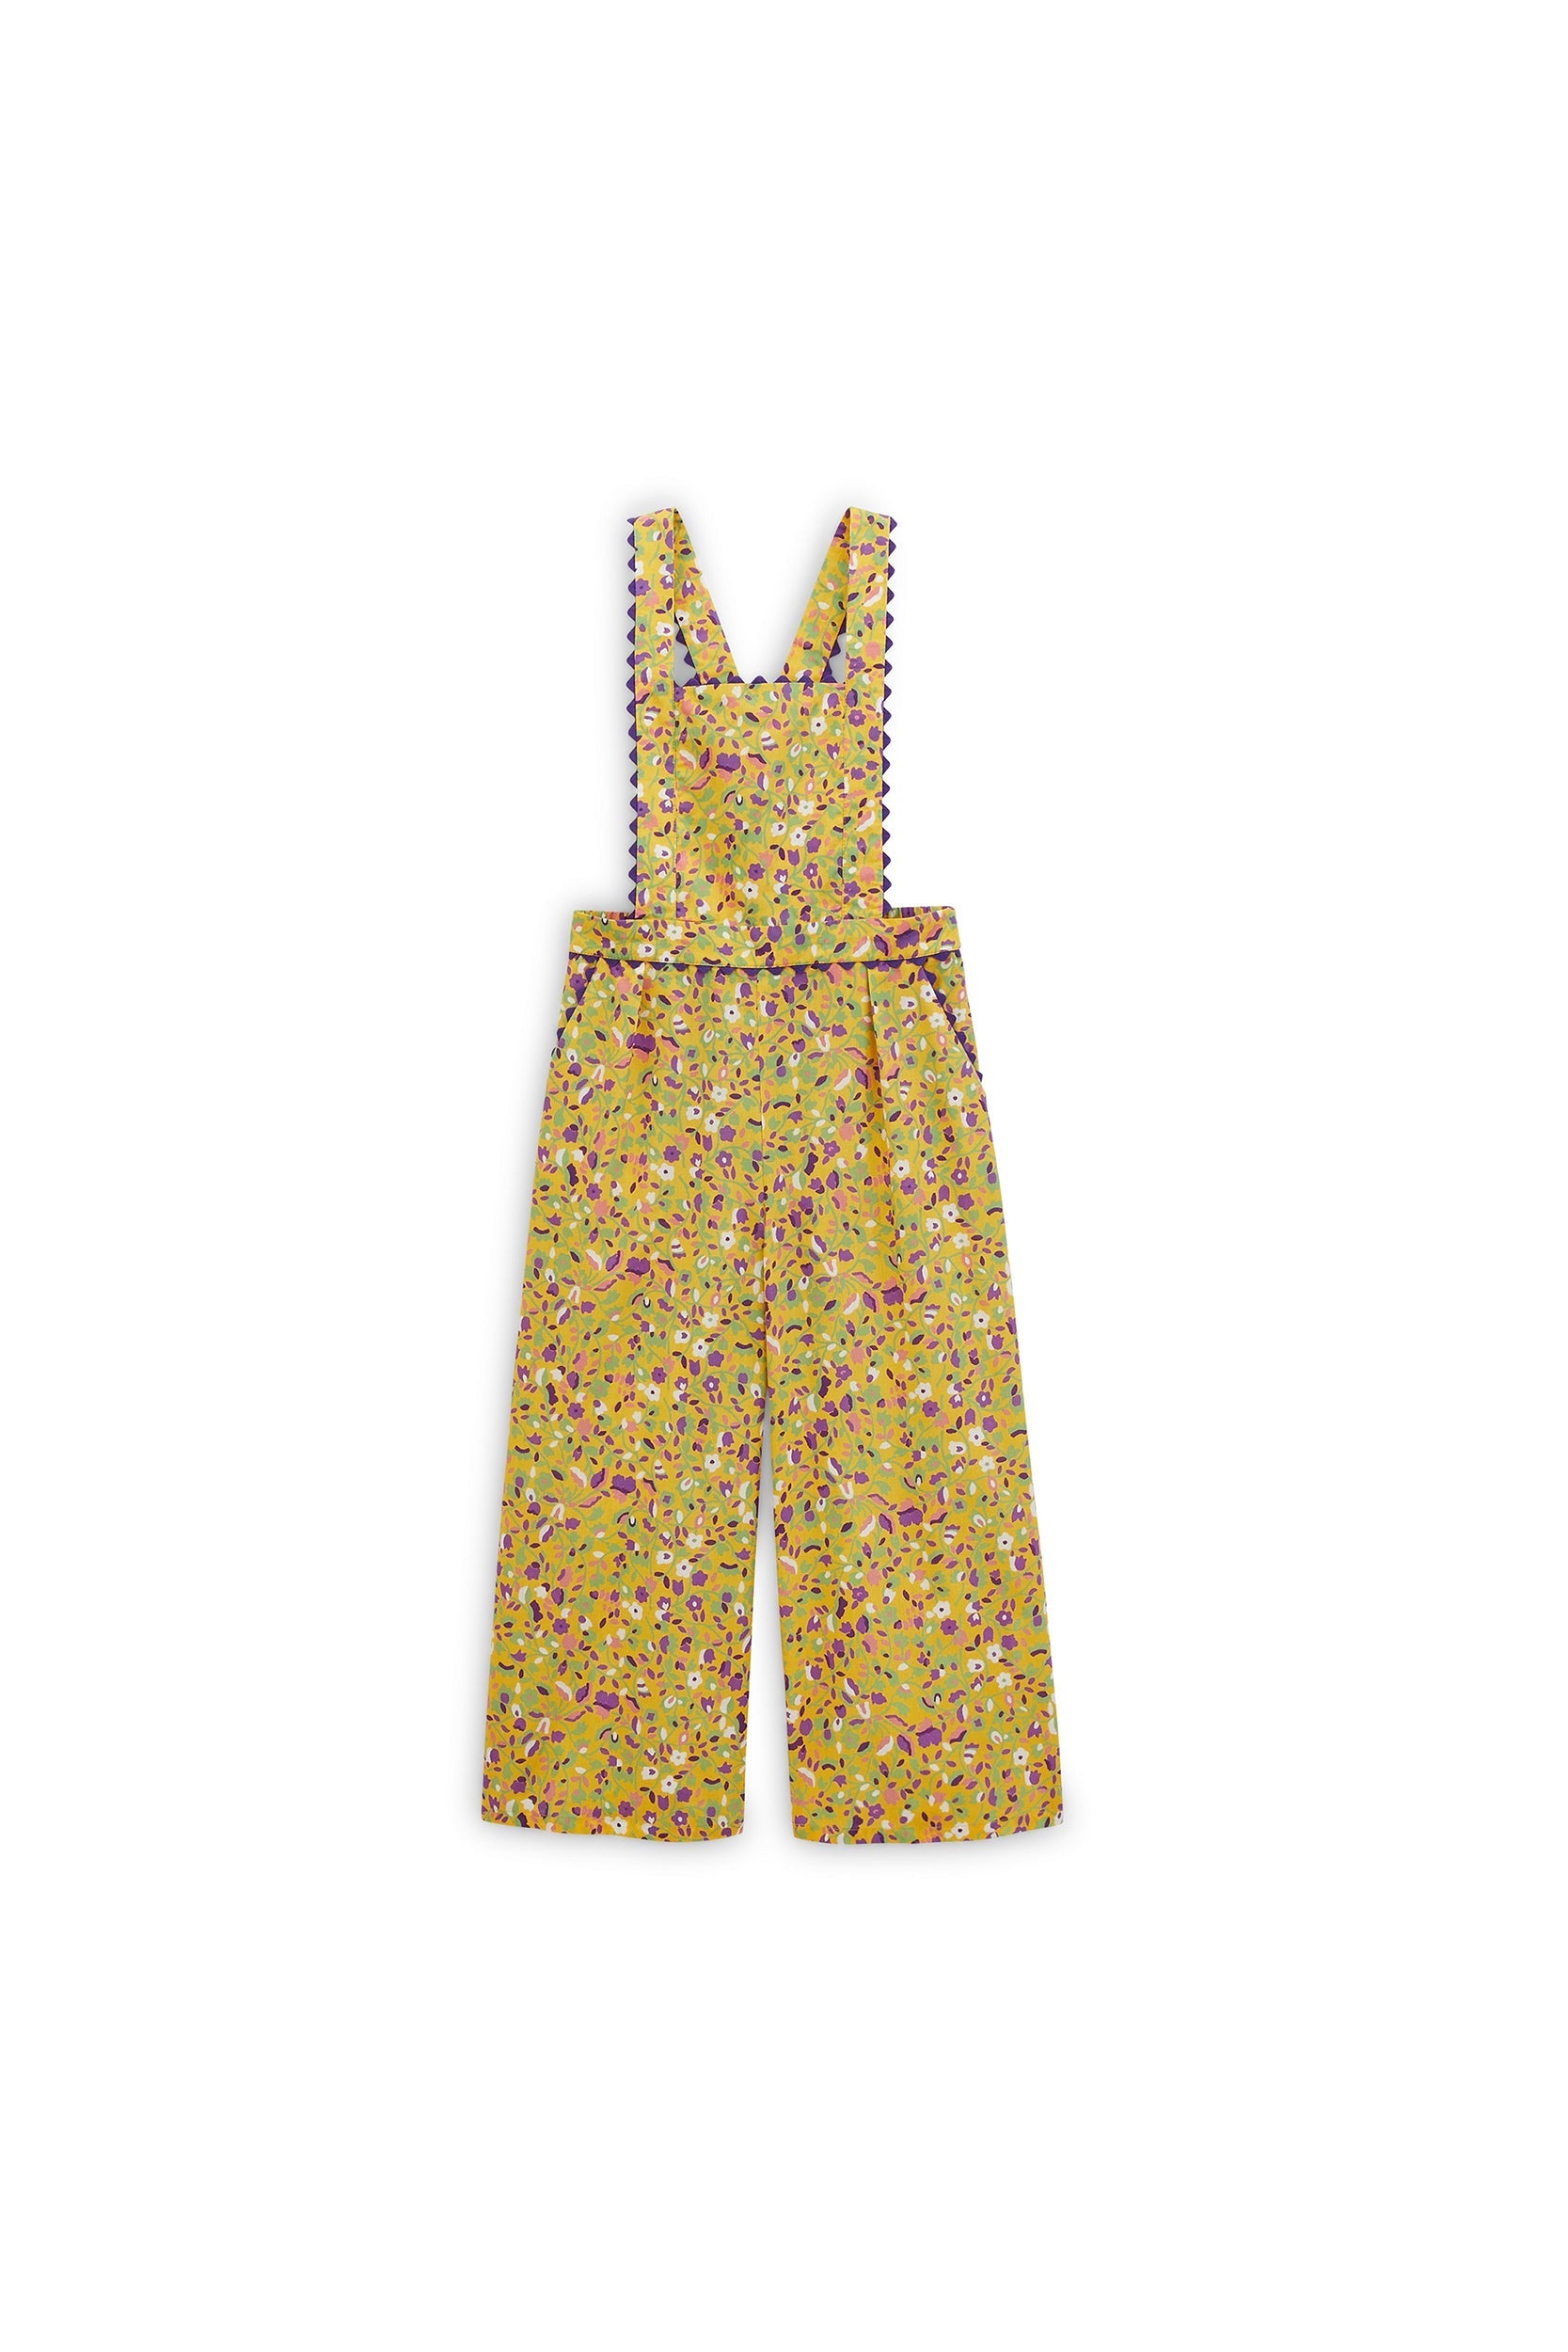 Trouvaille dungarees with a myriad of flowers print